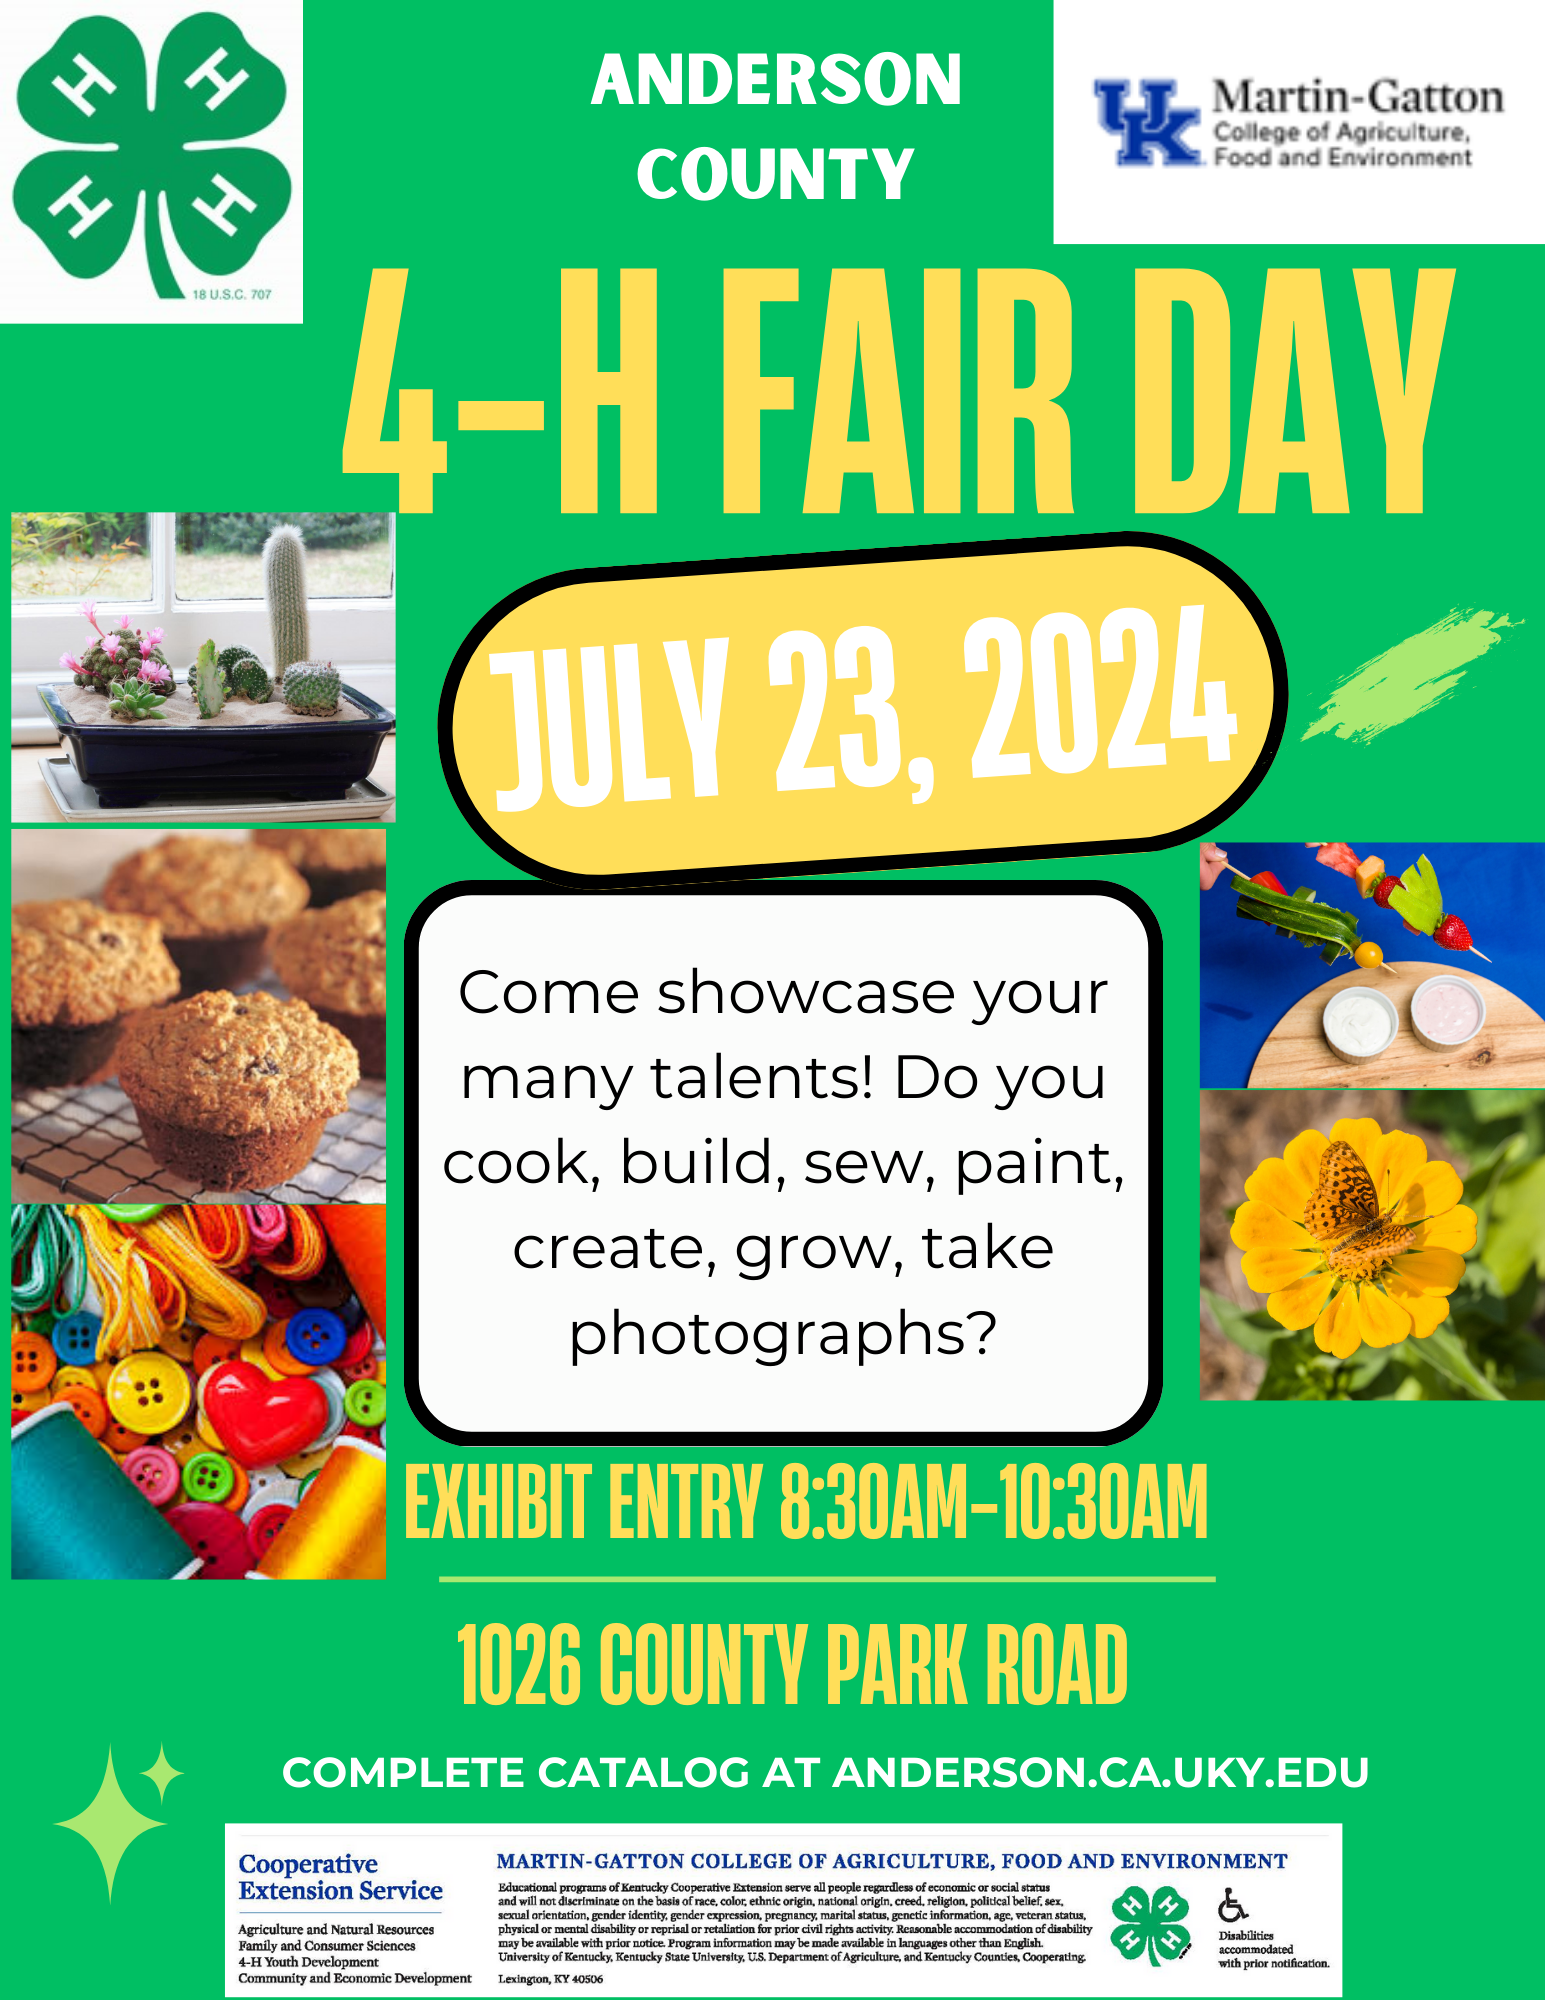 Flyer with 4-H Fair Day Information